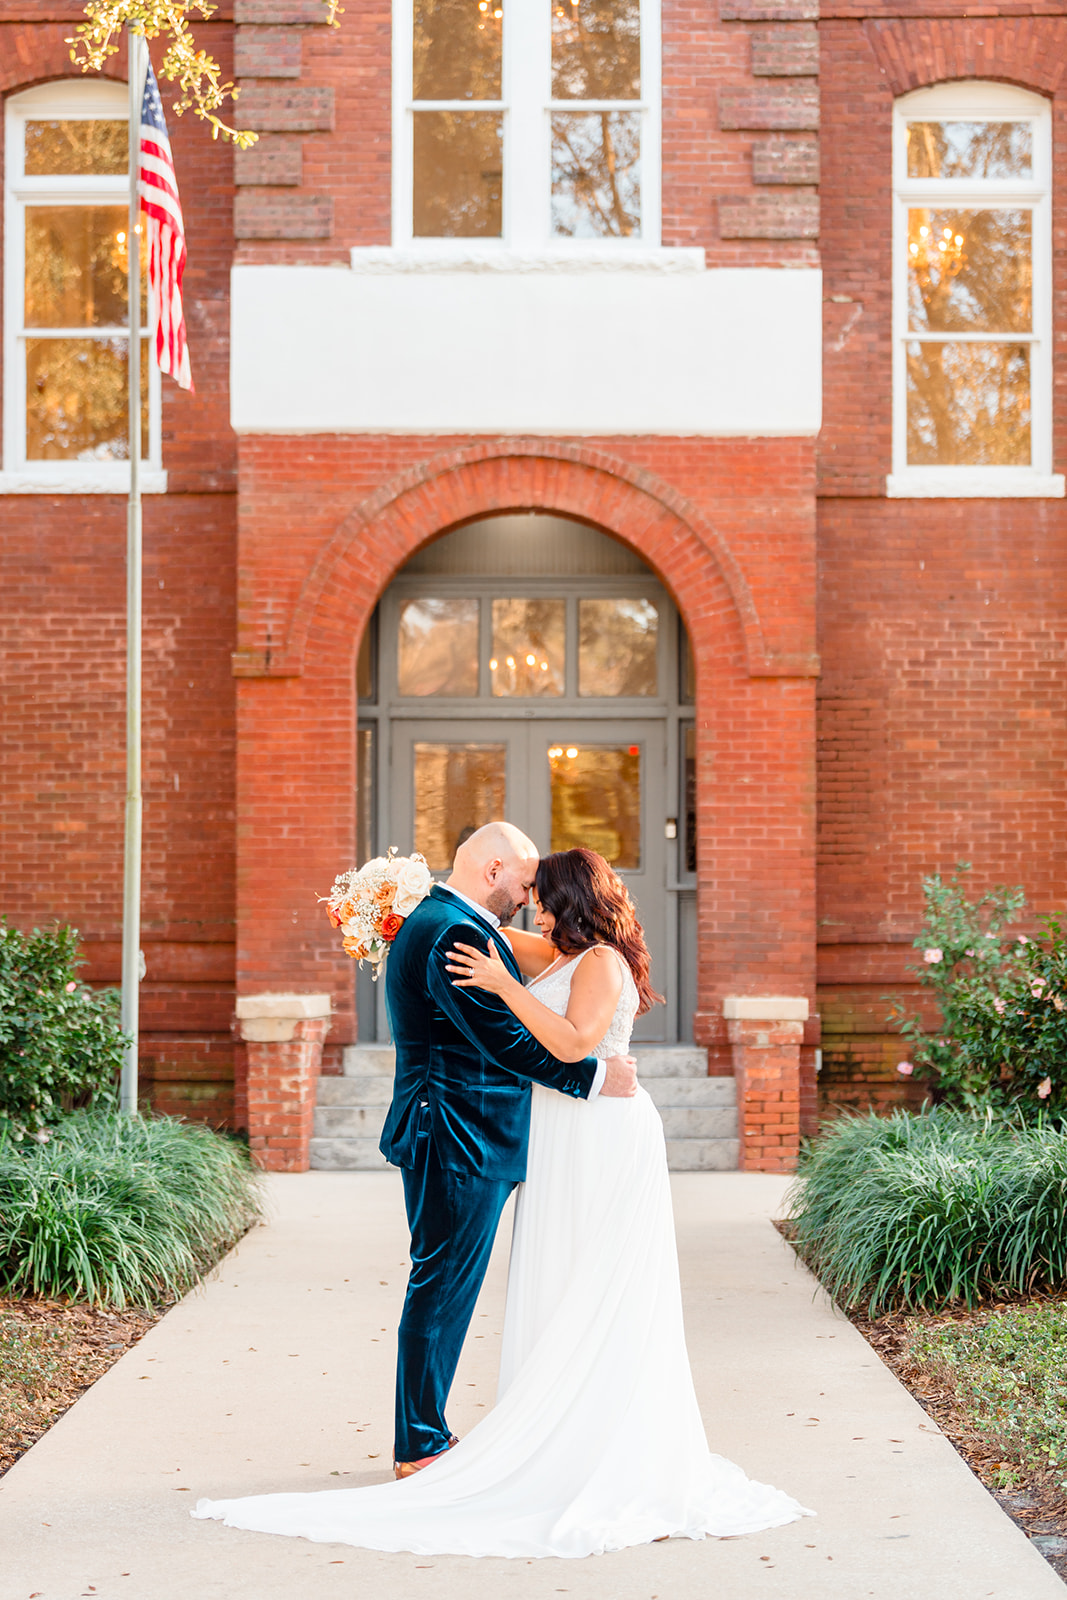 Couple embracing at the front of Venue 1902, touching foreheads in a tender moment.